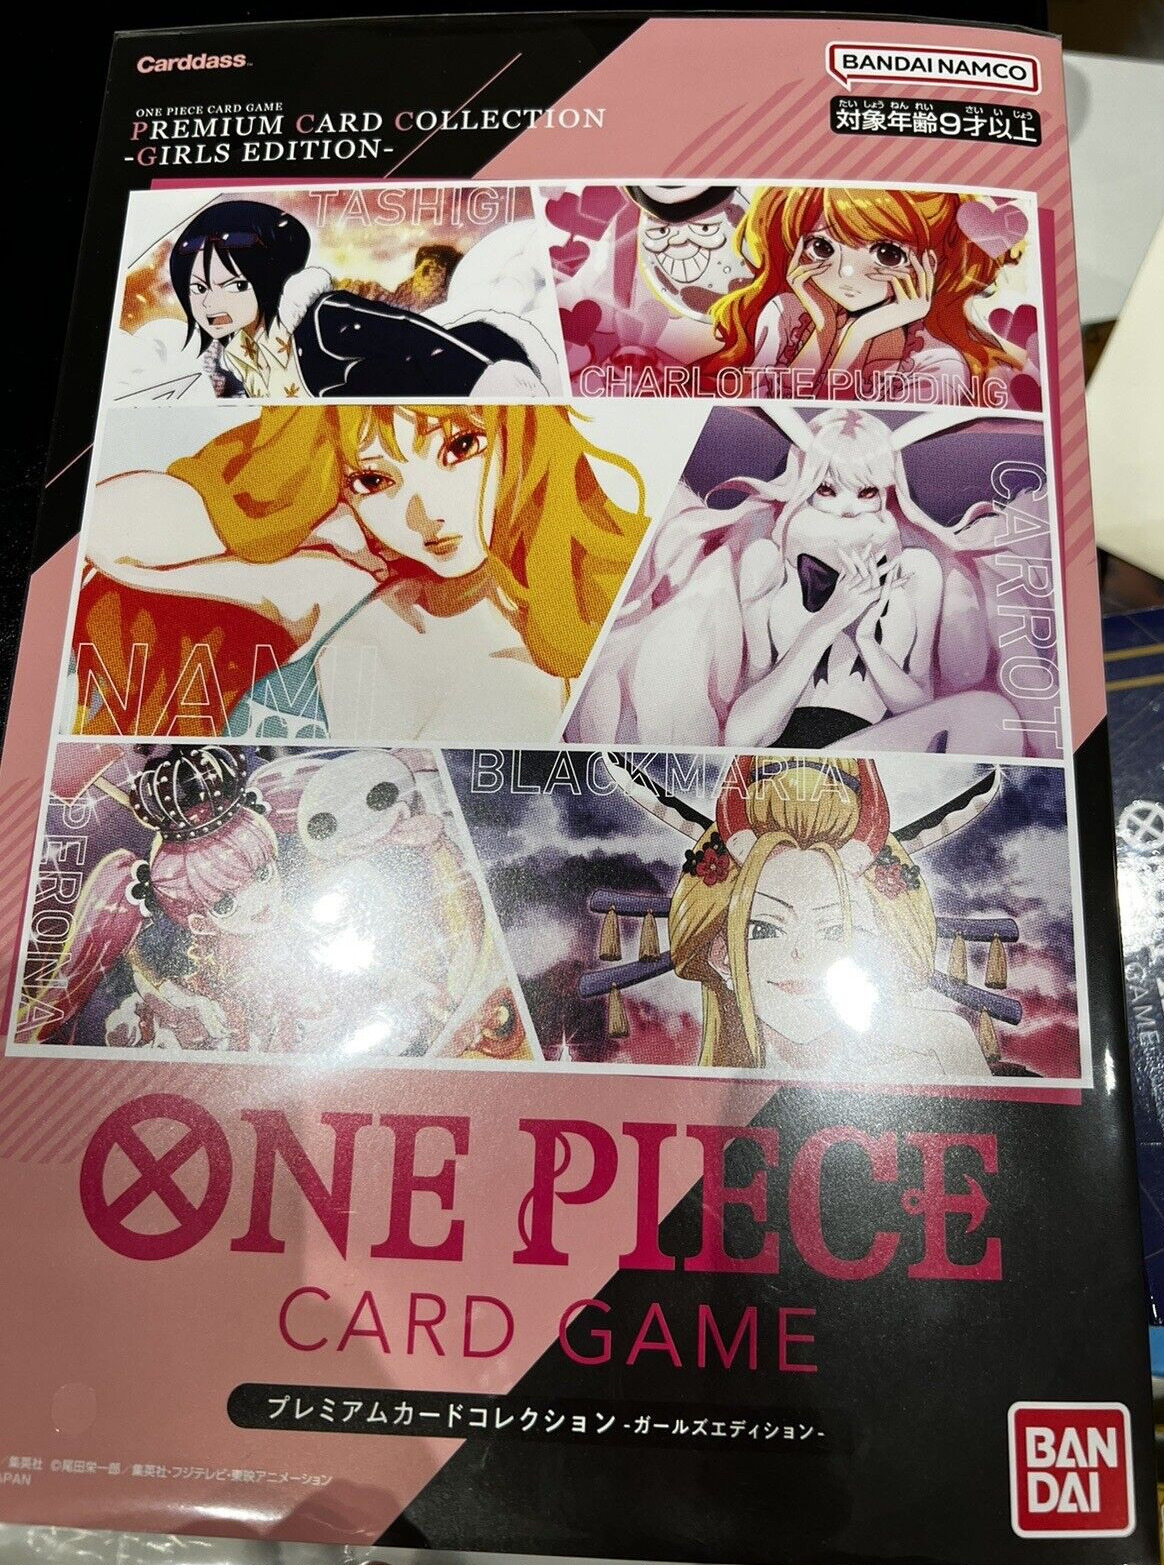 PREMIUM CARD COLLECTION - GIRLS EDITION - ONE PIECE CARD GAME EMBUSTED WOW